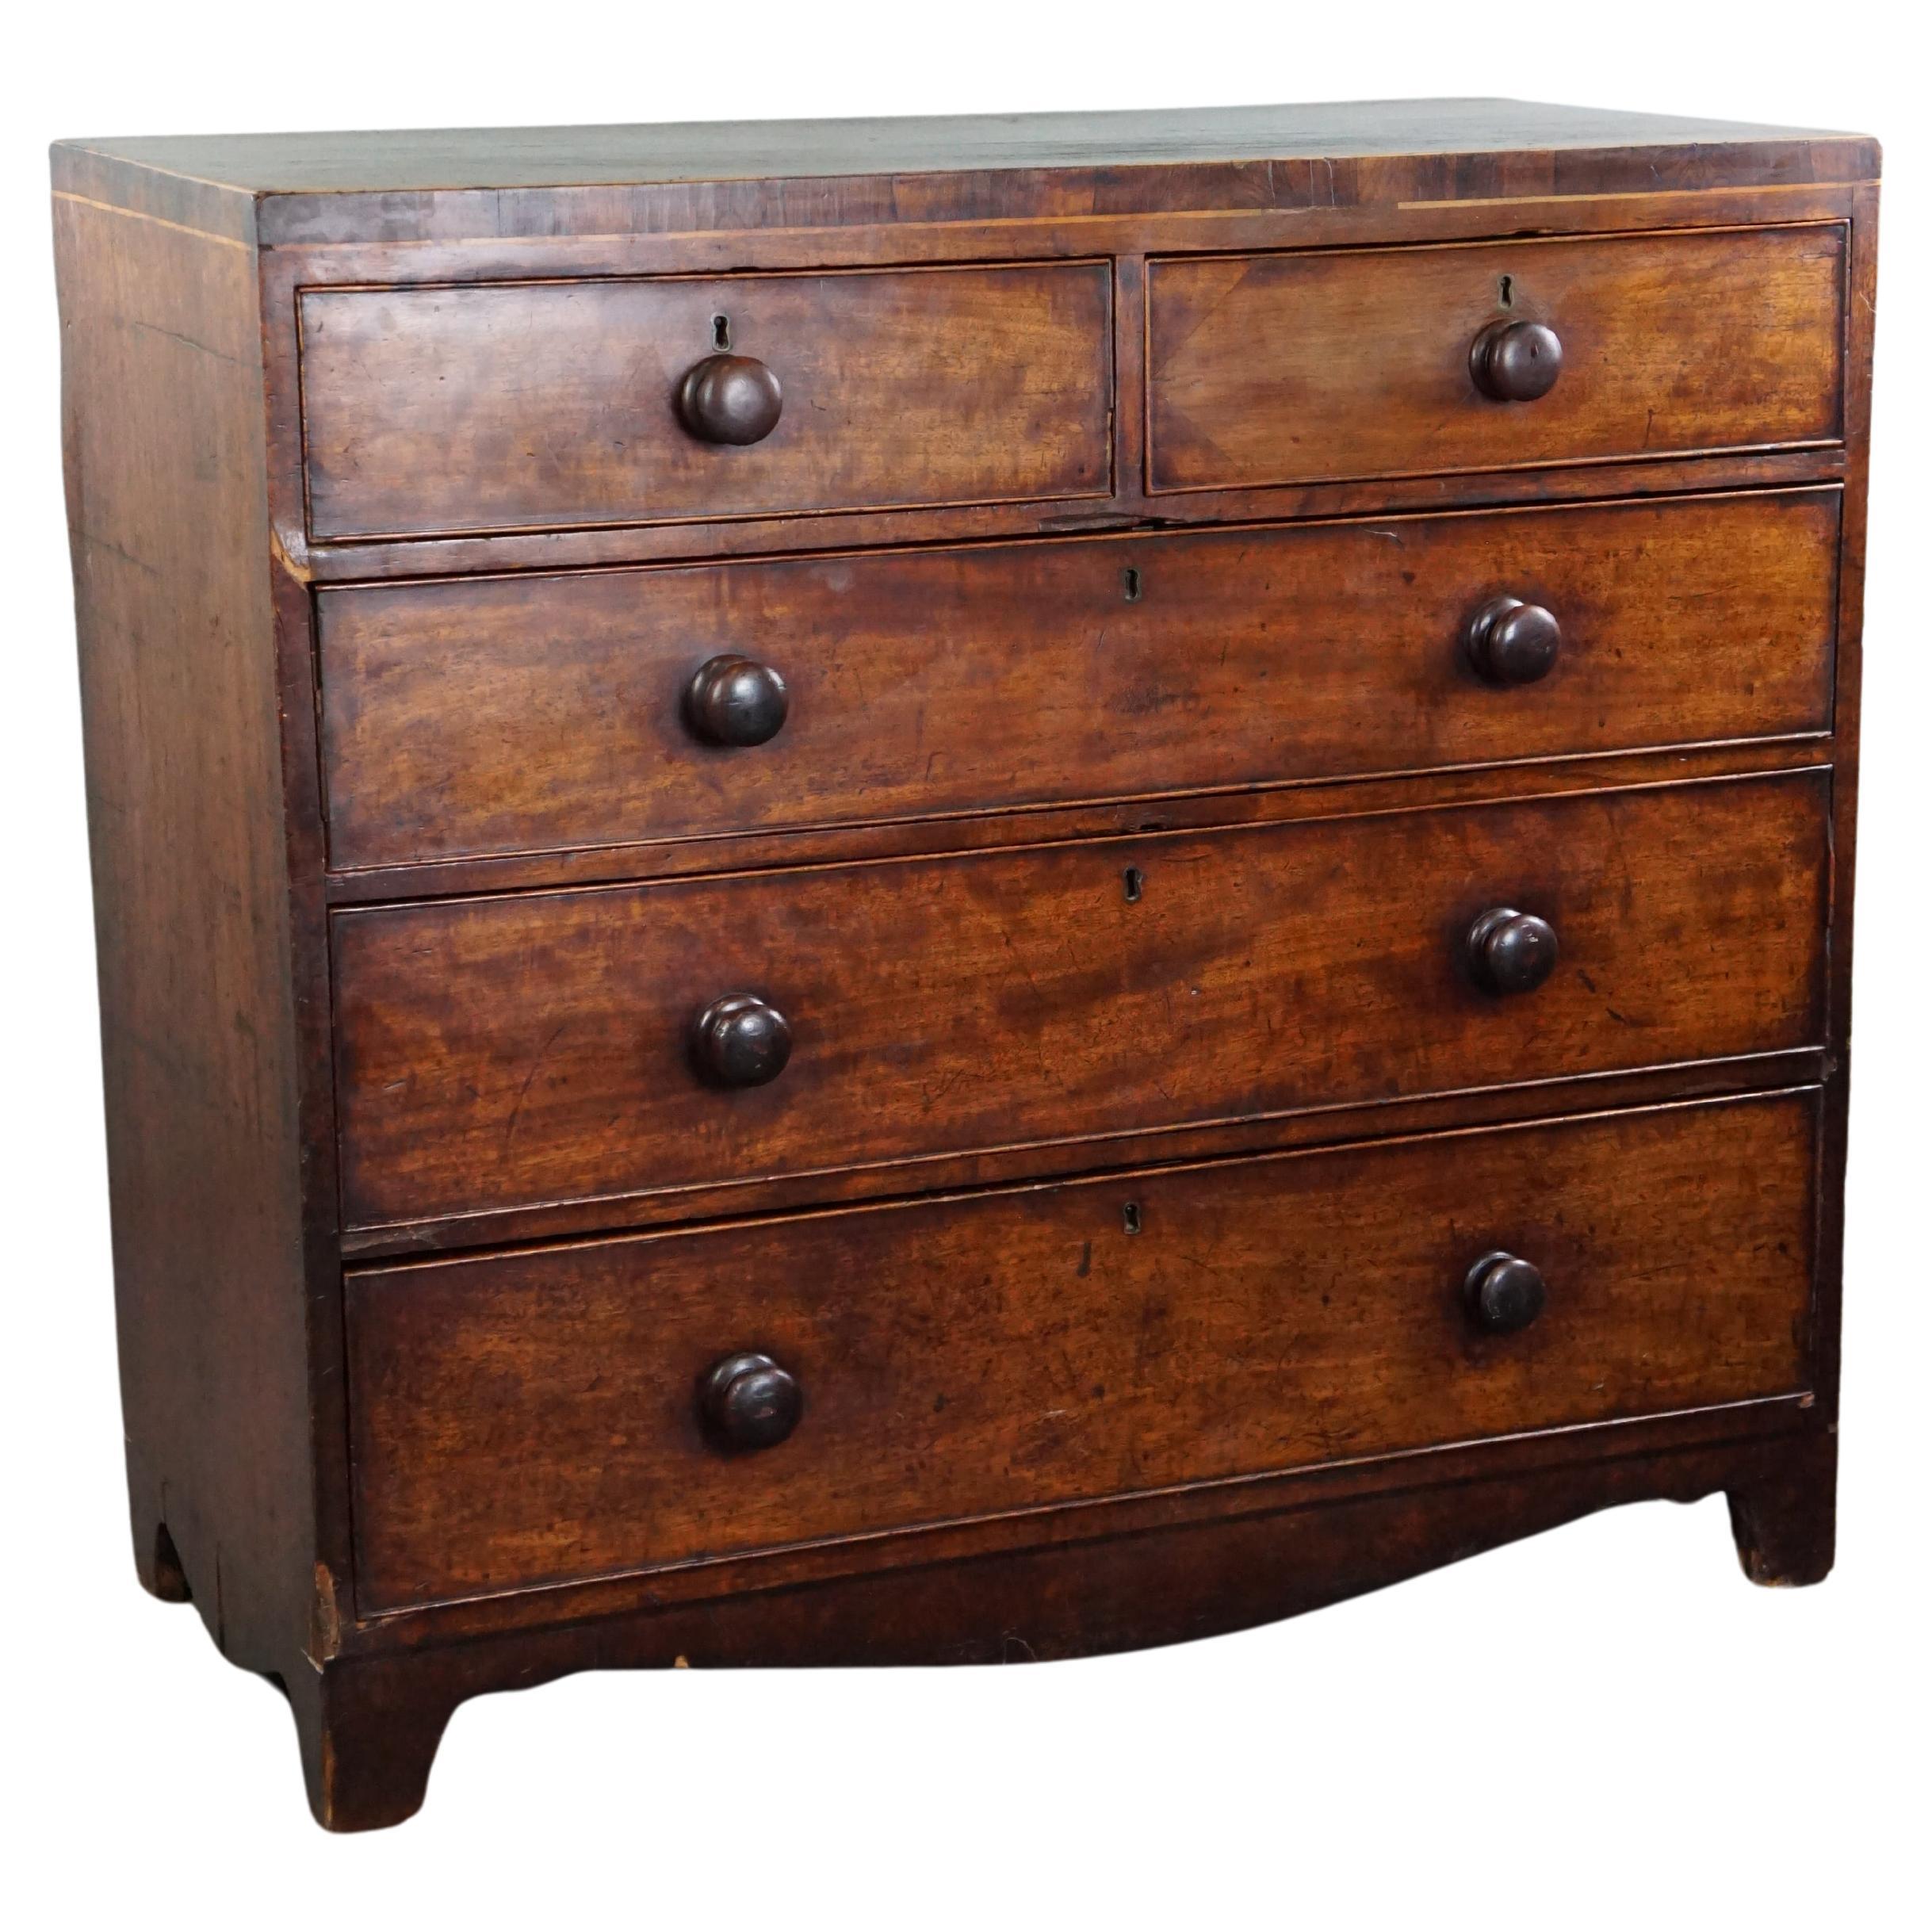 Robust antique English mahogany chest of 5 drawers from the mid-19th century For Sale